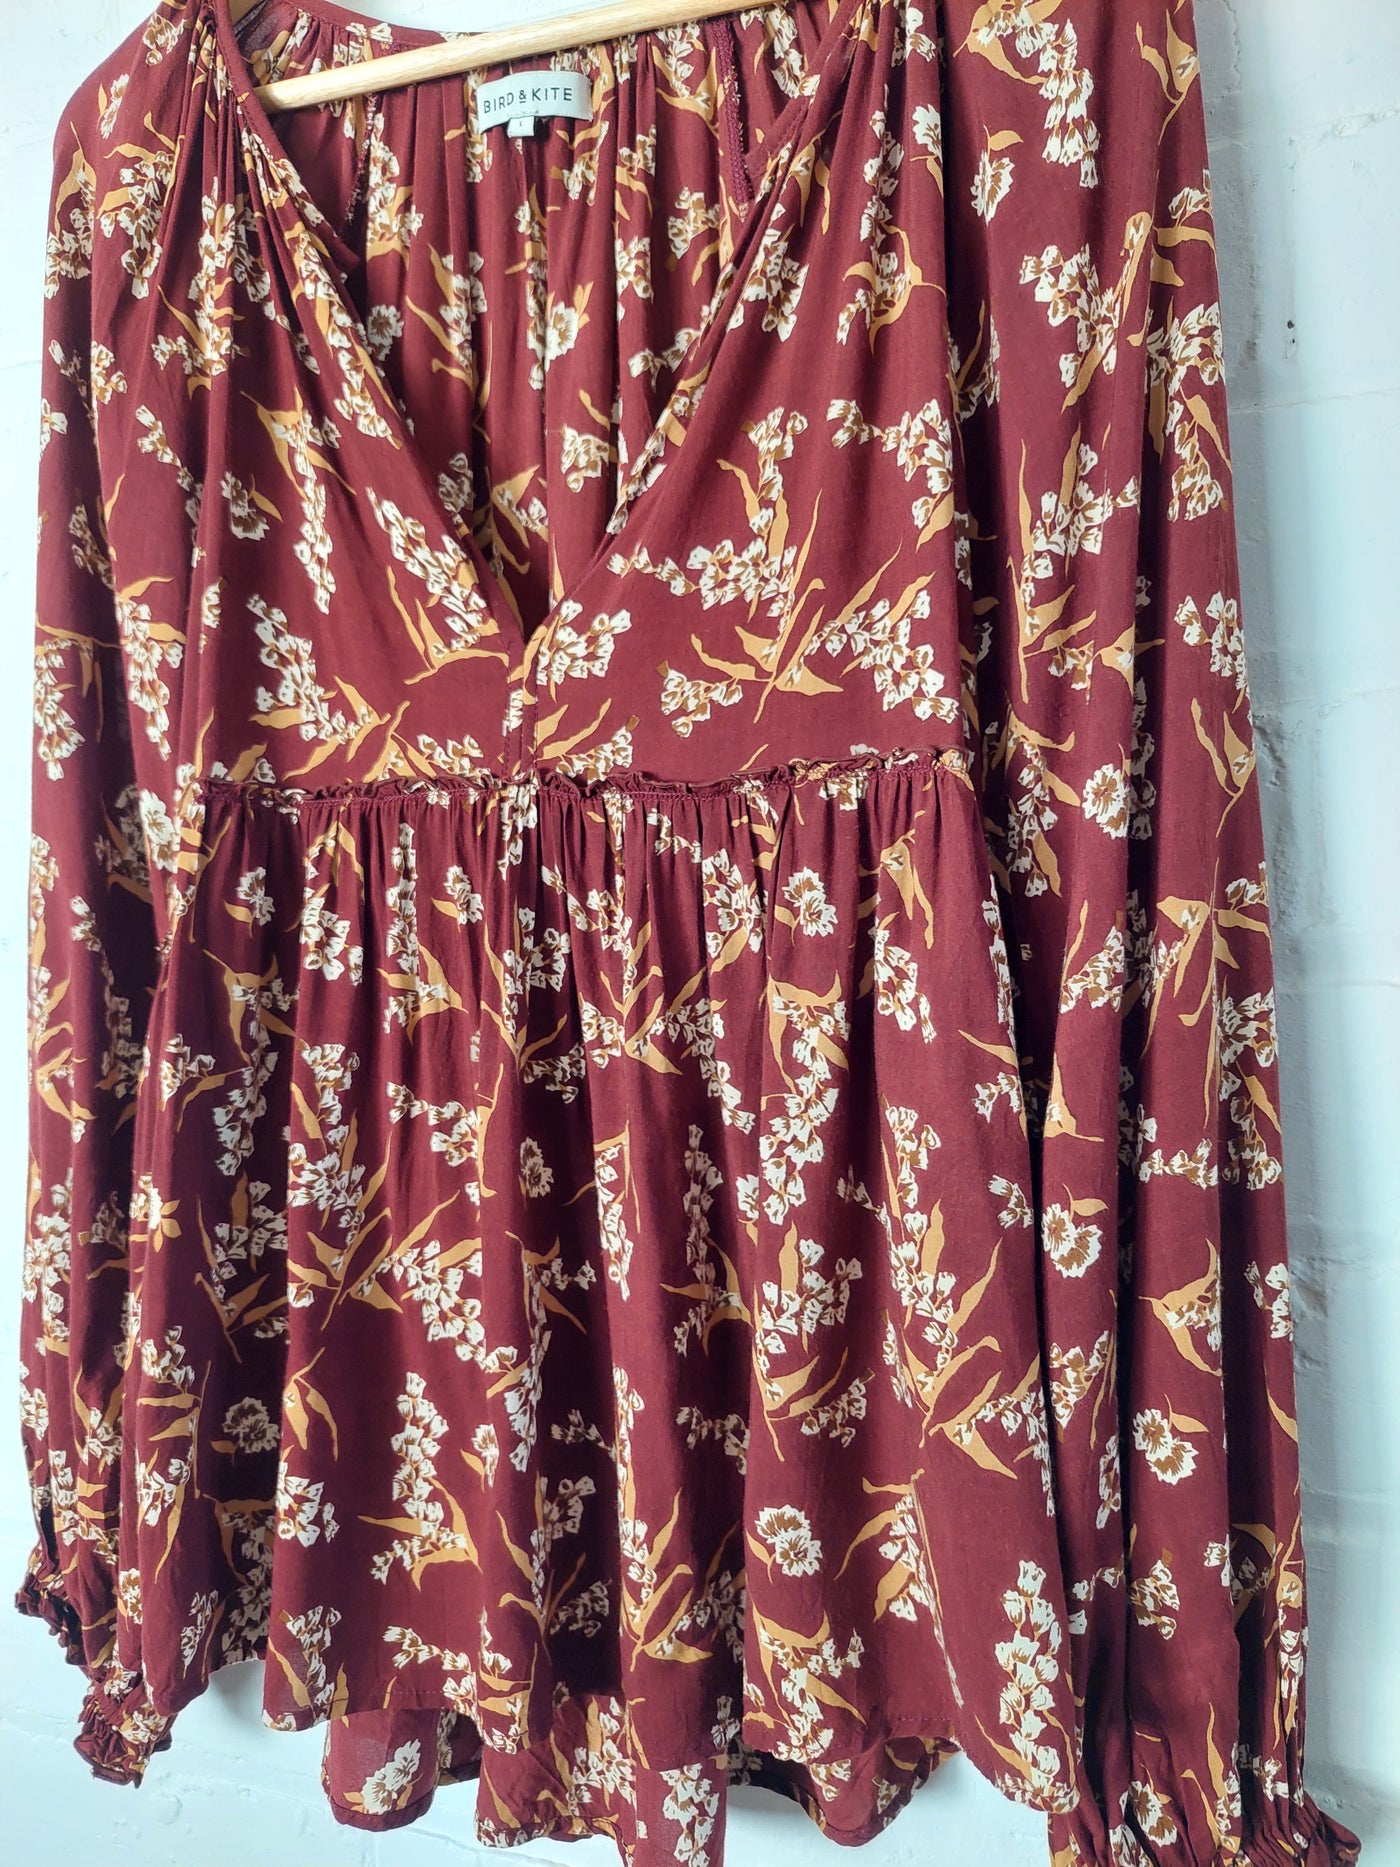 Bird & Kite Carly Top in Native Blooms print, Size L (14)